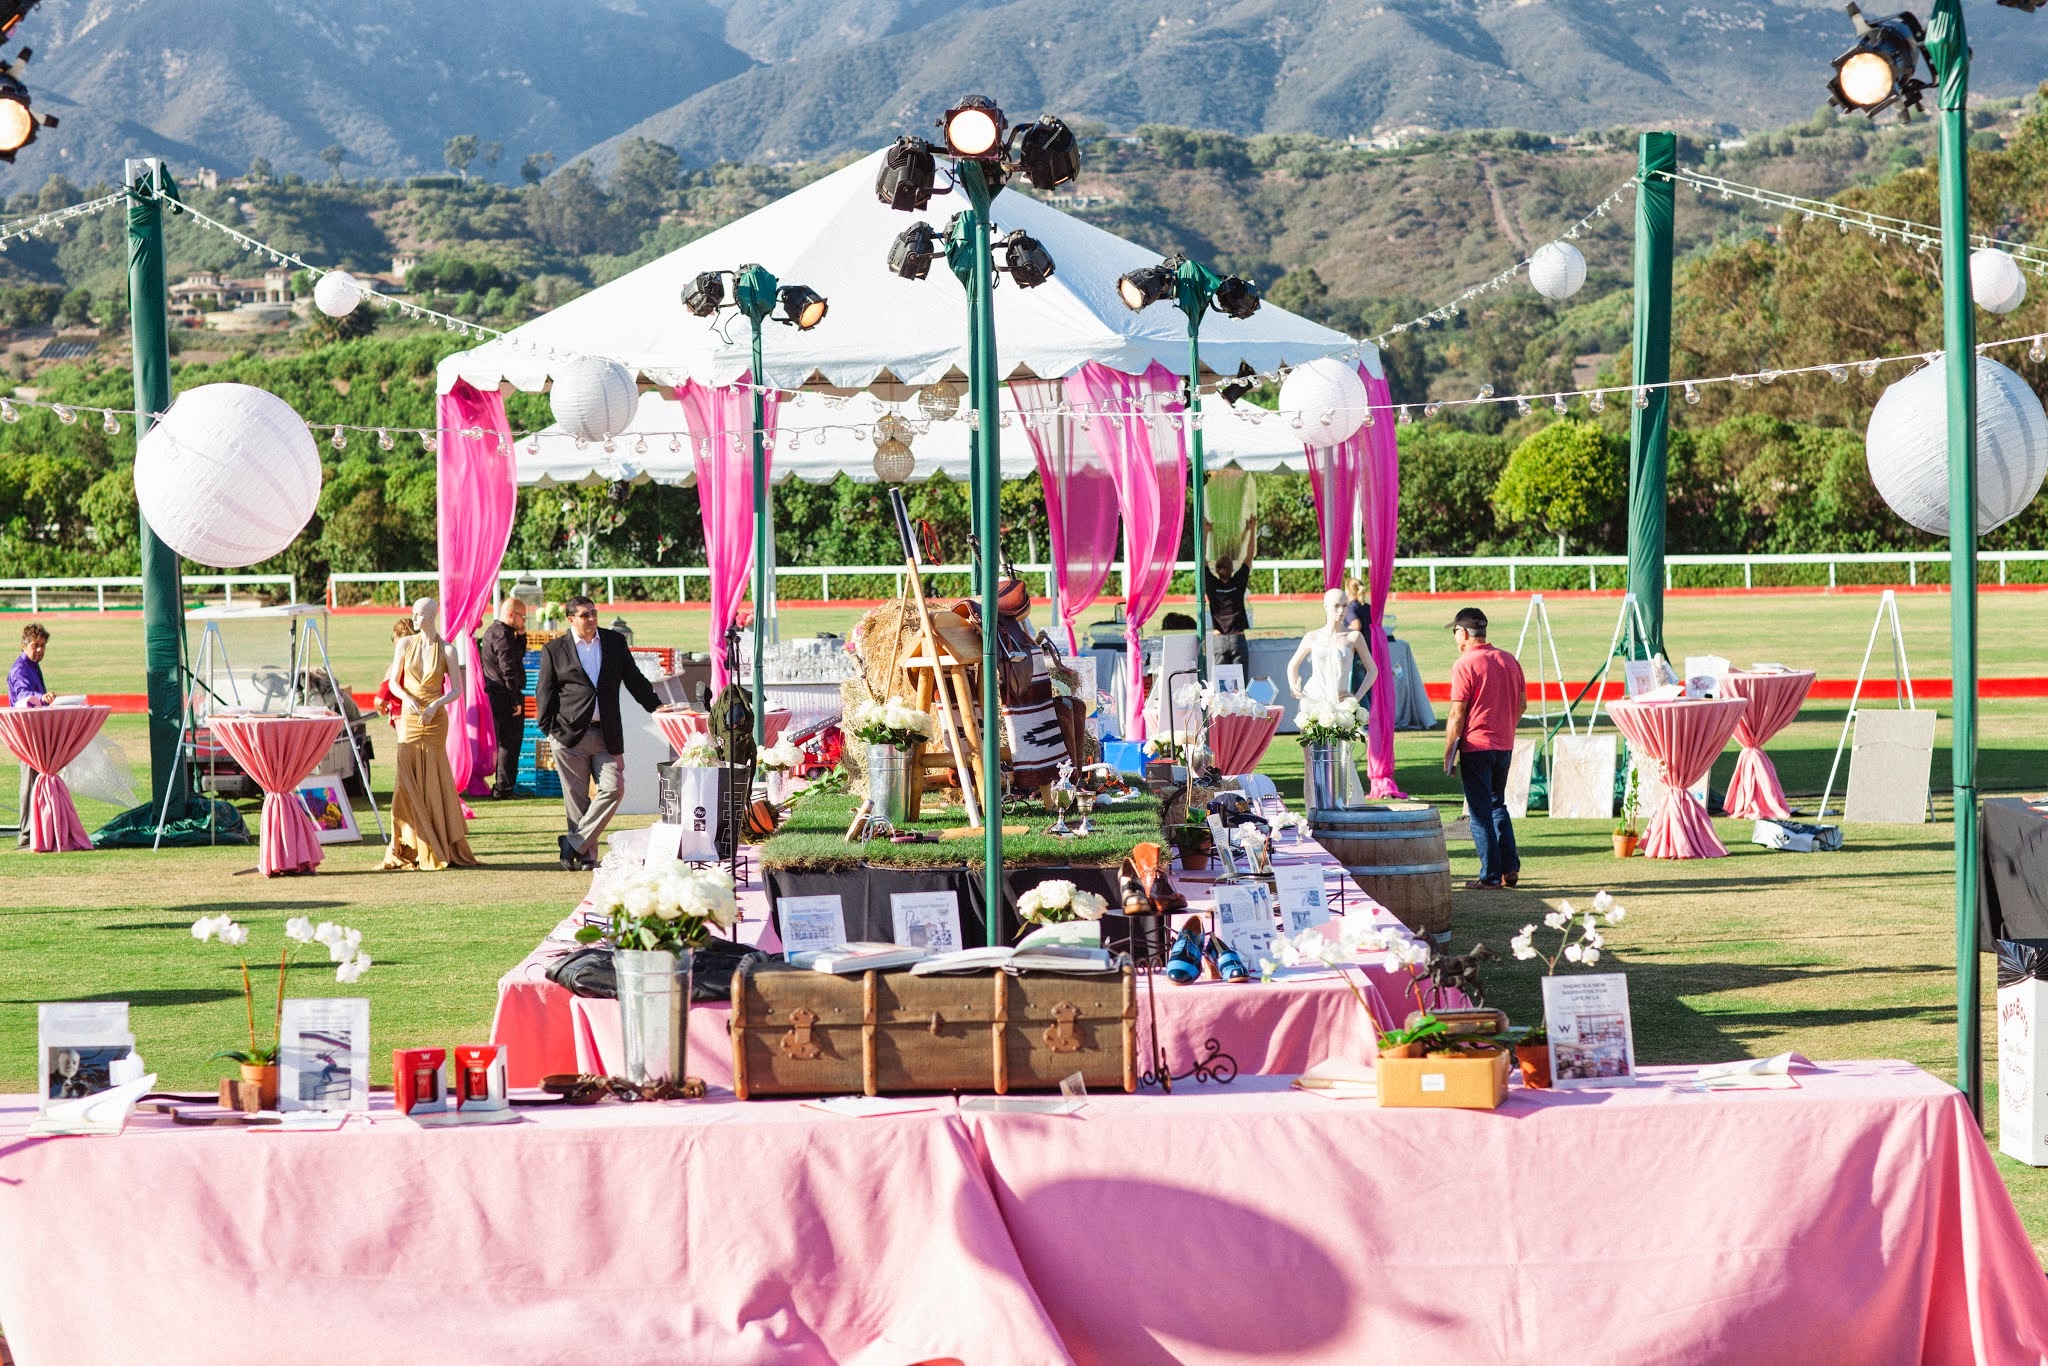 www.FeliciEvents | Pink Polo Party | Funraising Event | Felici Fundraiser | Polo Theme | Clarissa Koenig Photography | Pink Event Design